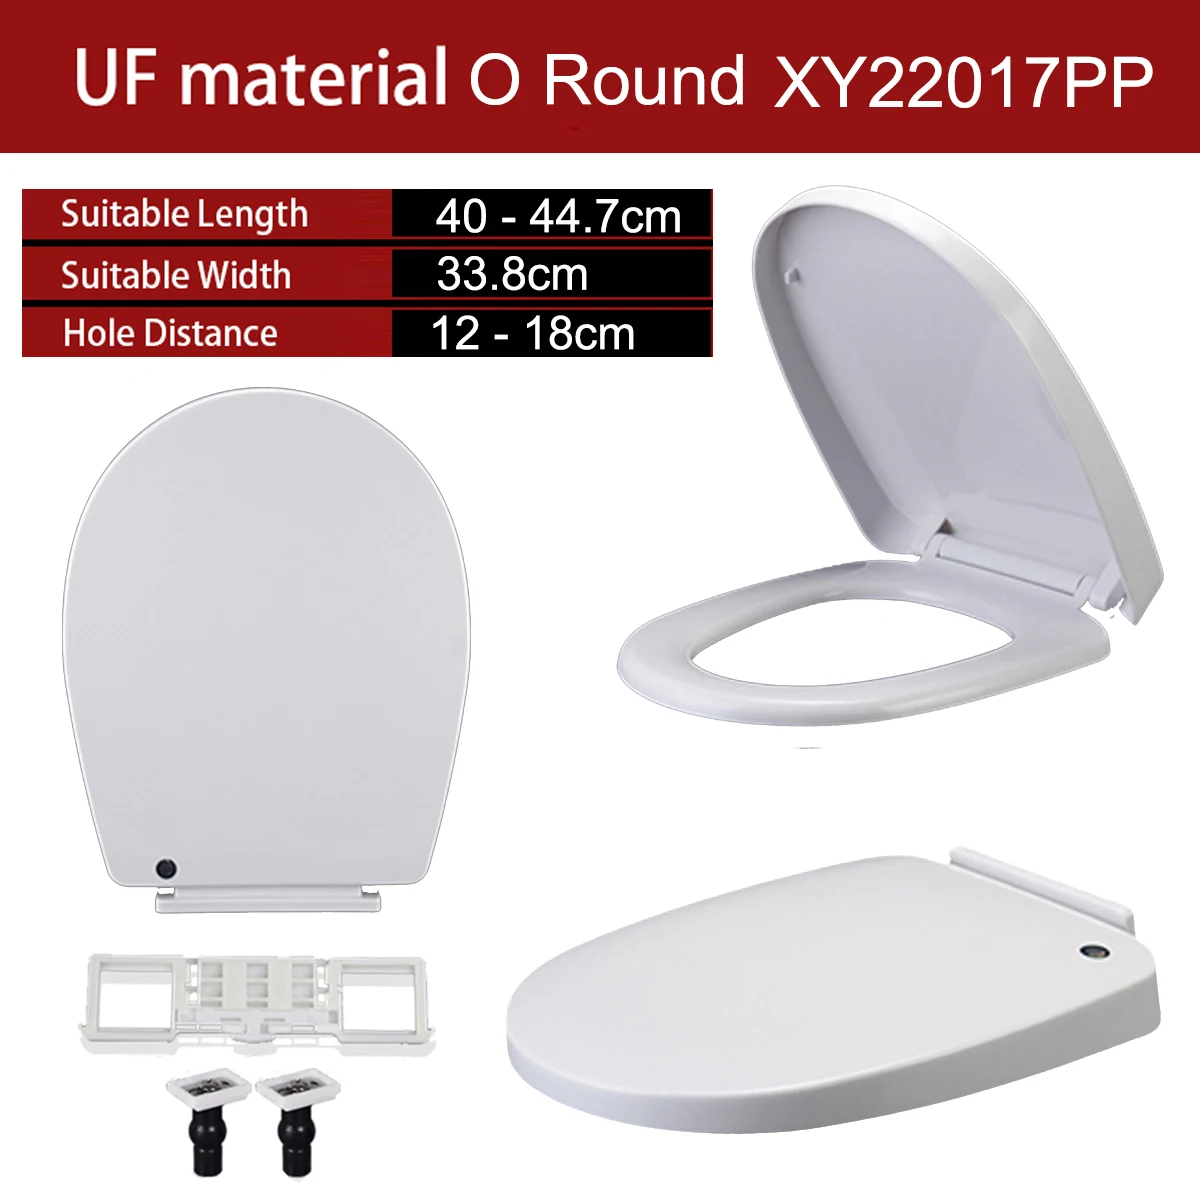 

Universal Round O Shape Slow Close WC Toilet Seats Cover Bowl Lid Top Mounted Quick Release PP Board Soft Closure XY22017PP